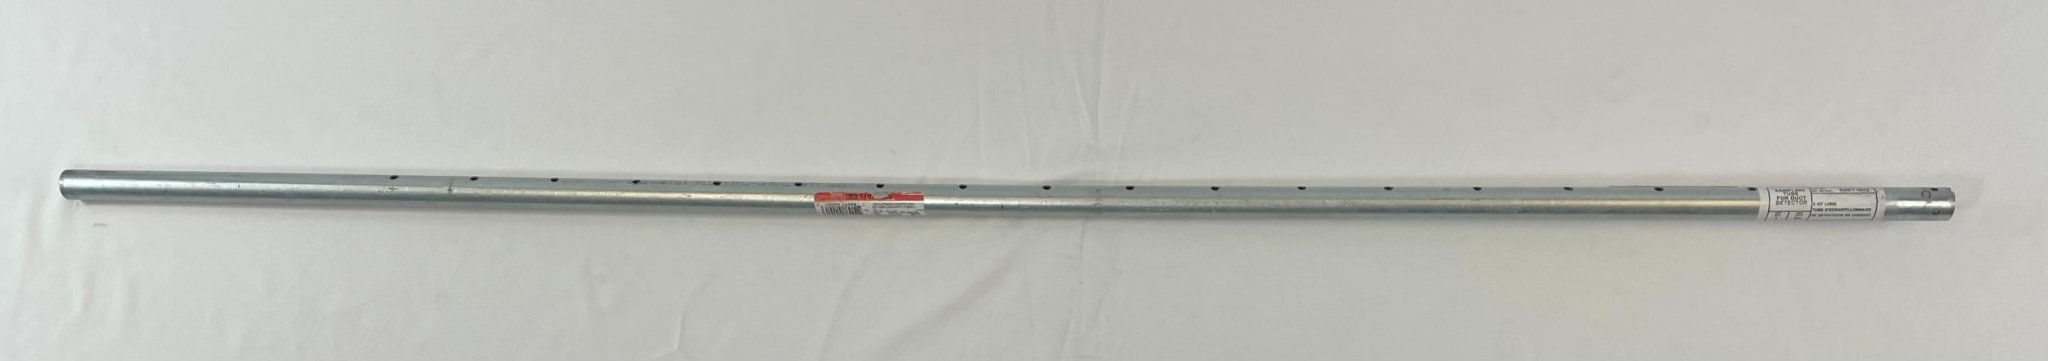 Edwards 6261-003 42-inch (1060mm) Air Sampling Inlet Tube - The Fire Alarm Supplier